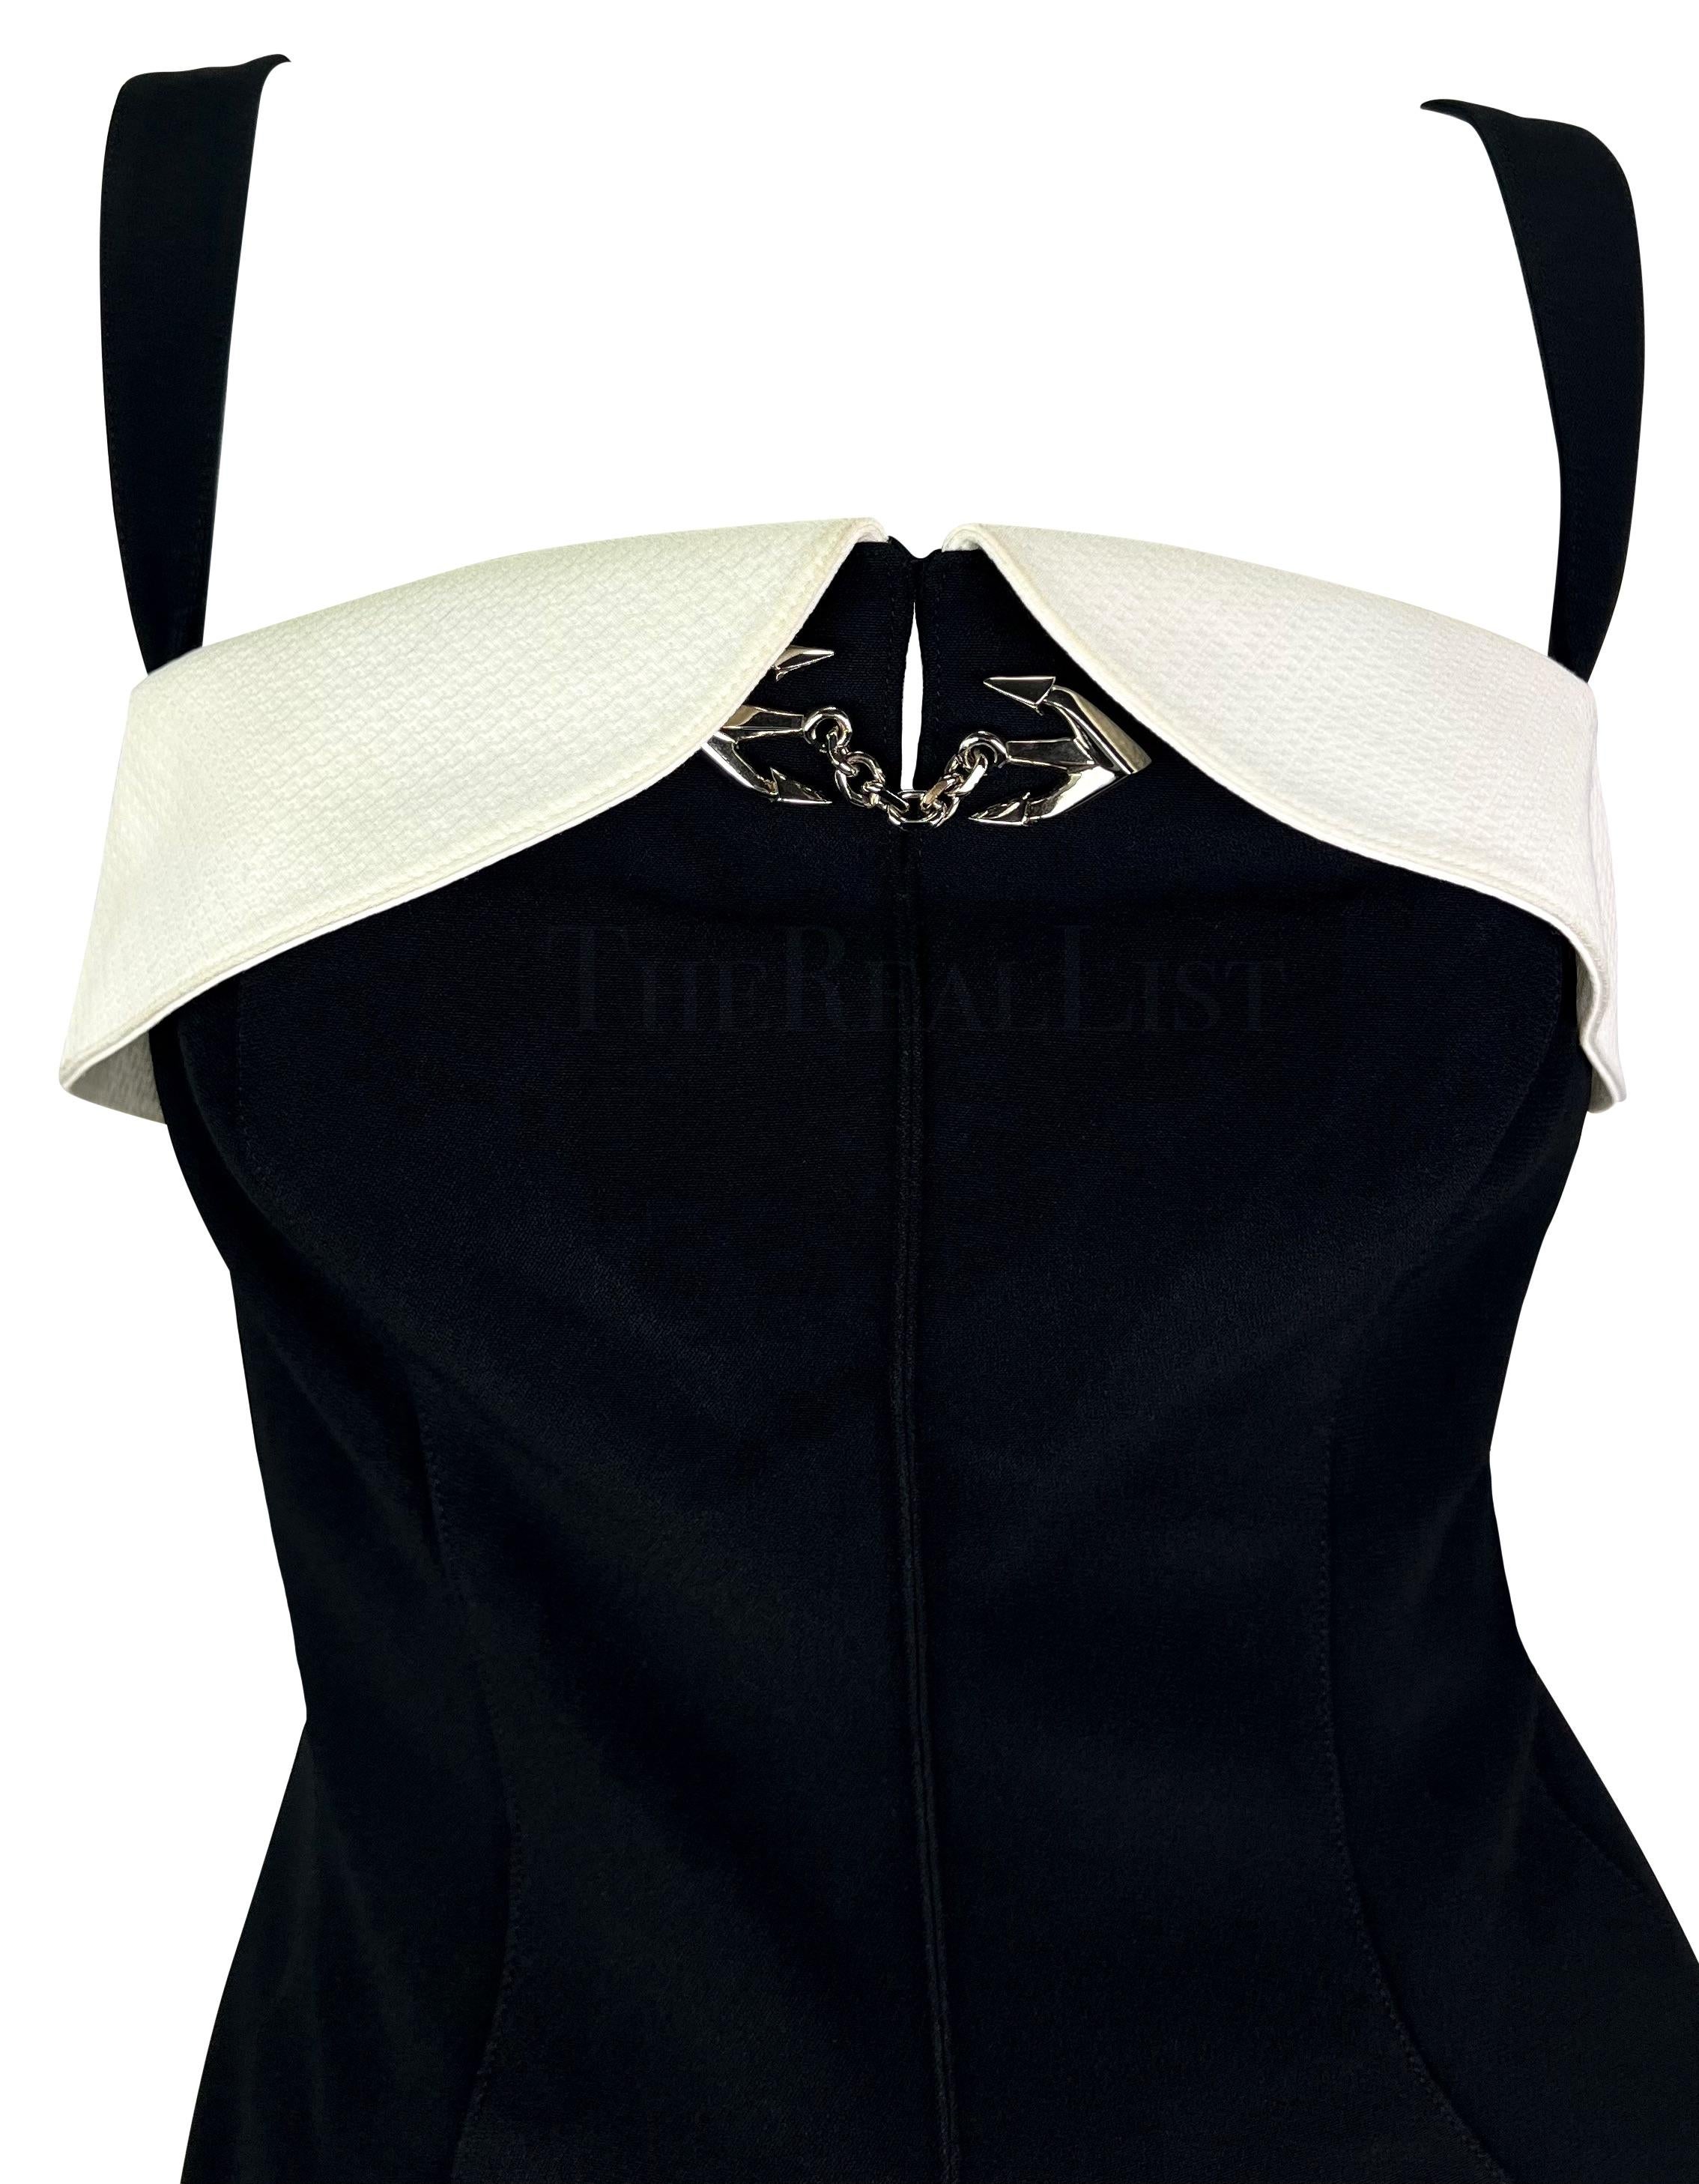 Presenting a black and white nautical Thierry Mugler mini dress, designed by Manfred Mugler. From 1996, this dress features a black body and straps and a white fold-over accent above the bust. The sleeveless dress features an angular neckline and is